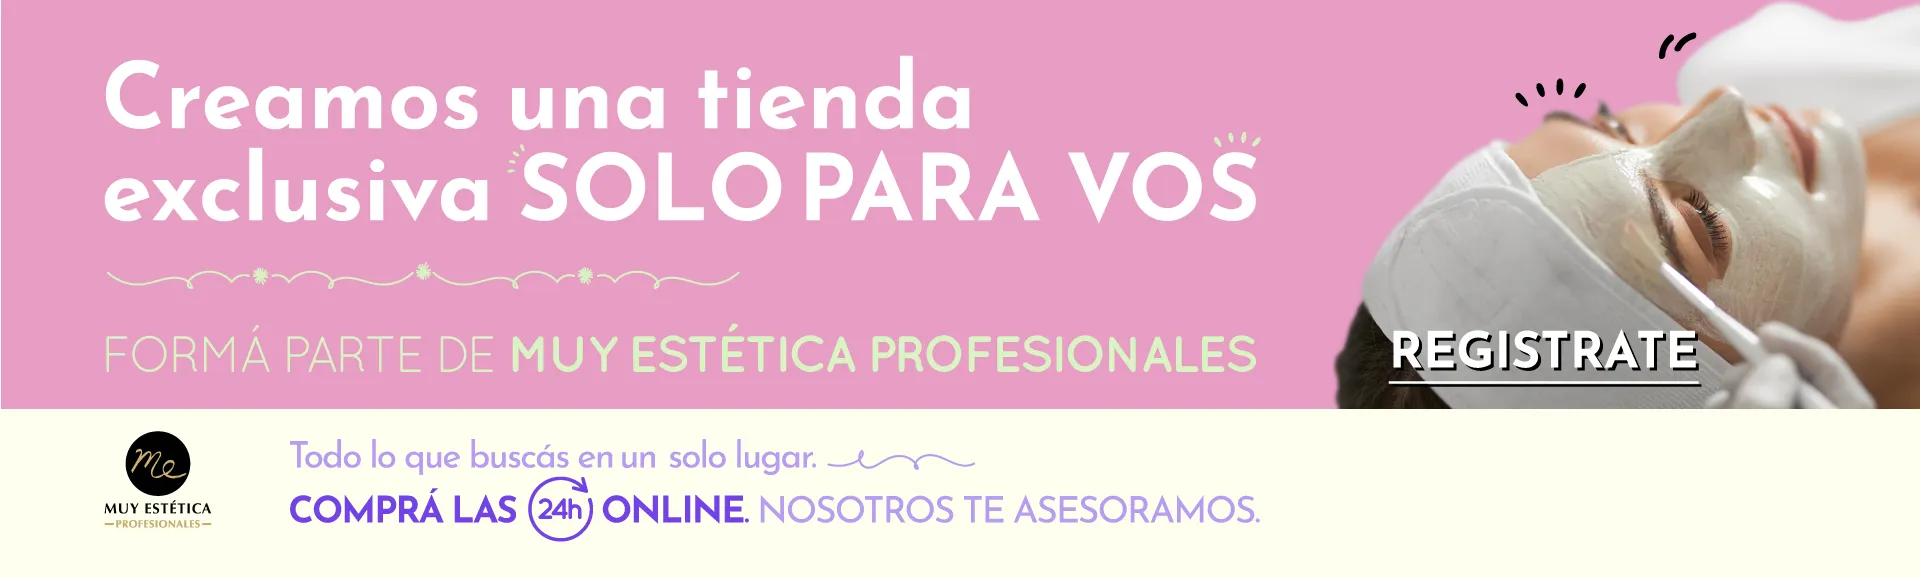 22-11-11-BANNERS-MUY-ESTETICA-profesionales-2-1